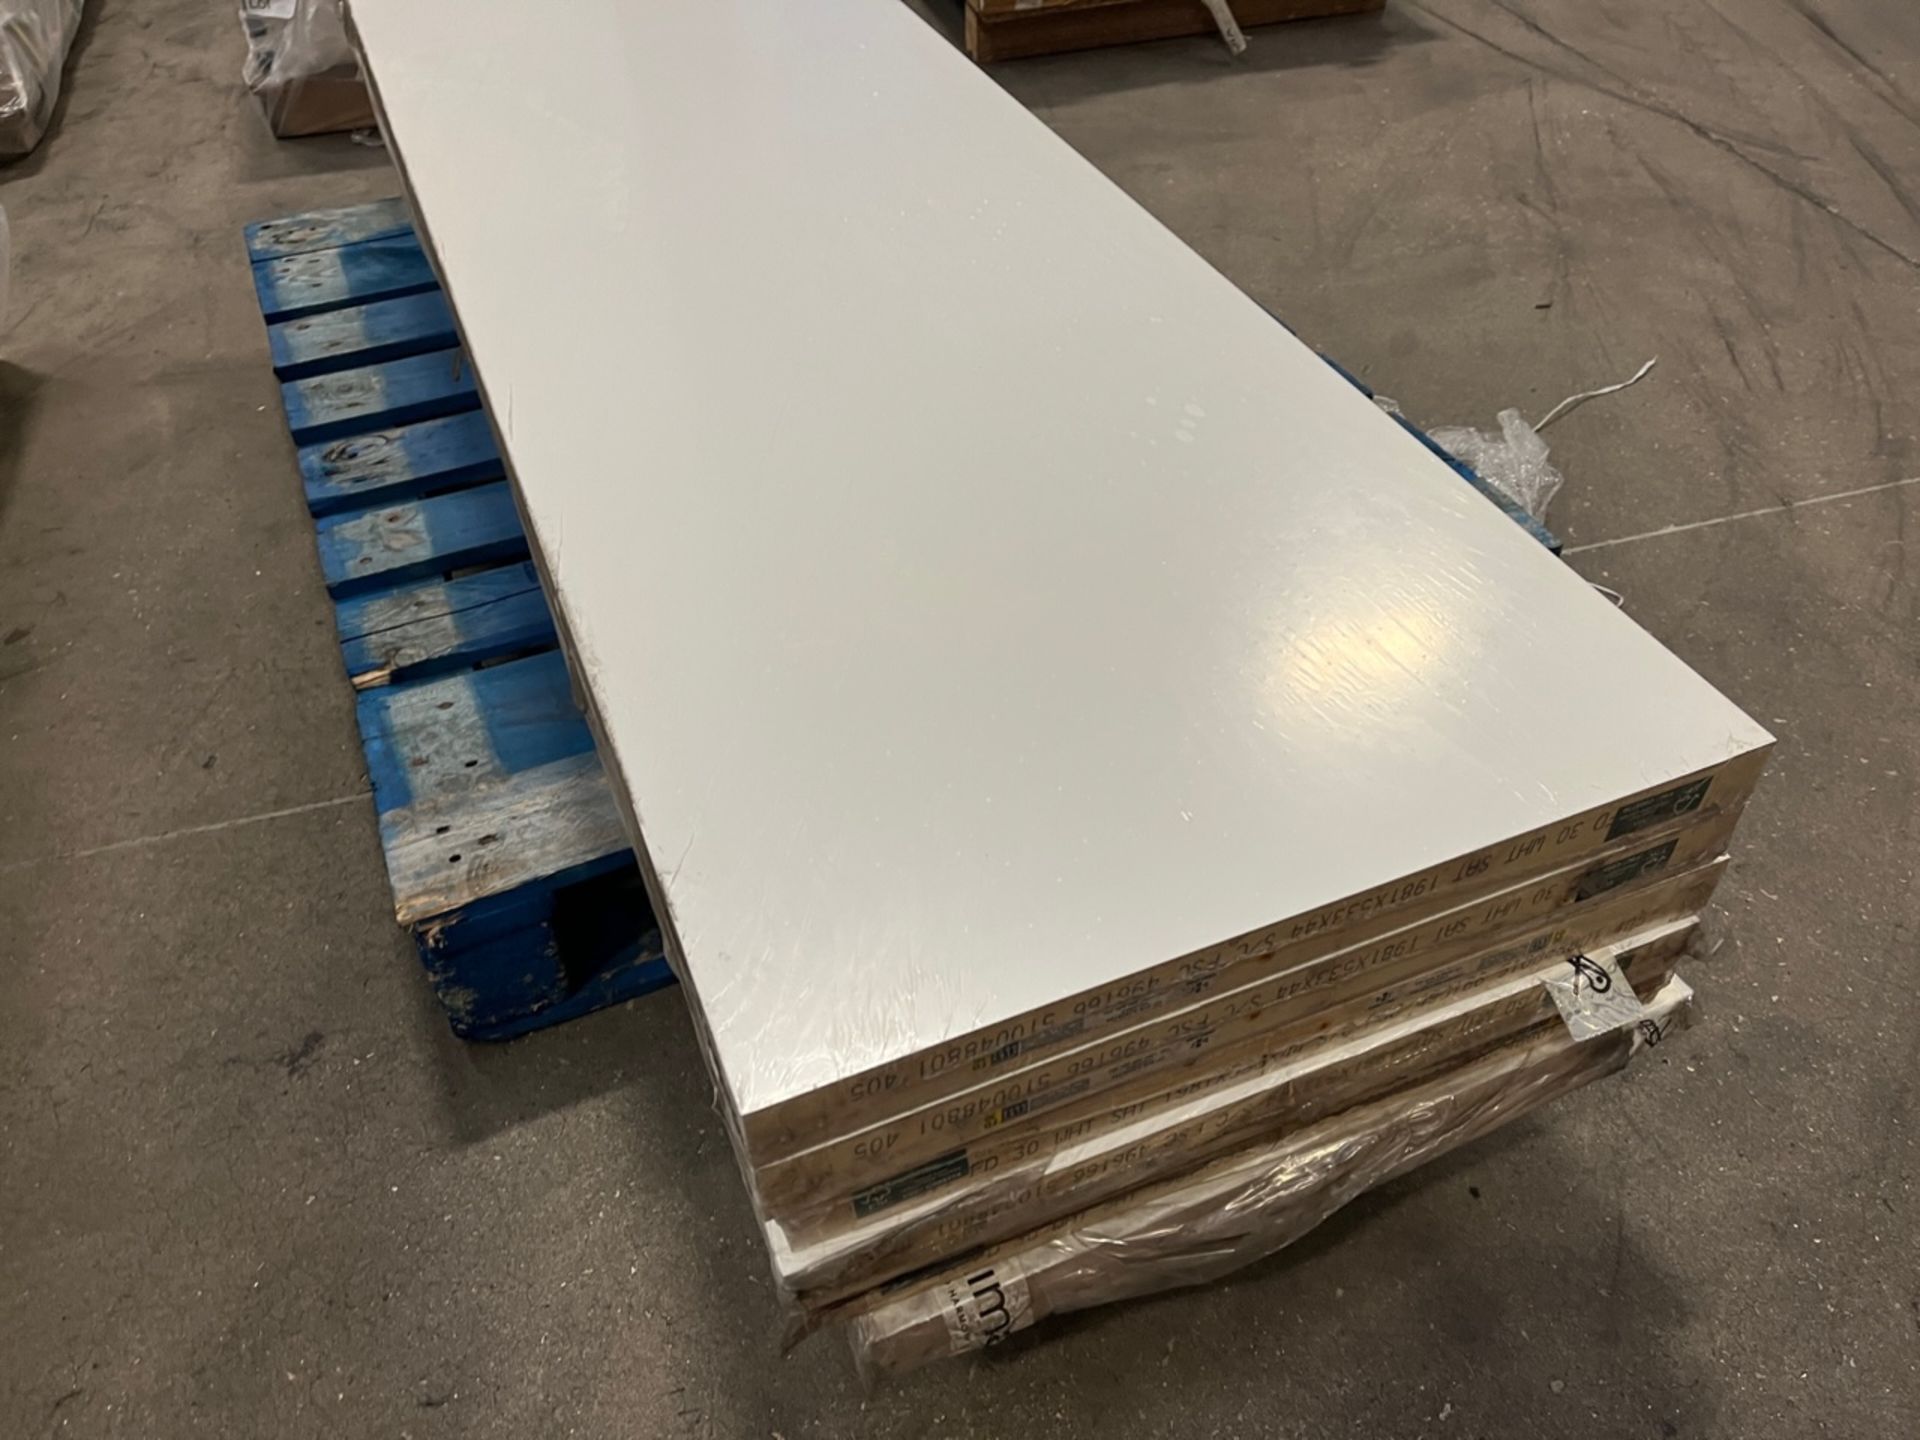 PALLET TO CONTAIN 2 X BRAND NEW PREMDOR OFF WHITE FULL GLASS PANEL WOODEN FIRE DOOR 78 X 27 X 1.8 - Image 2 of 2